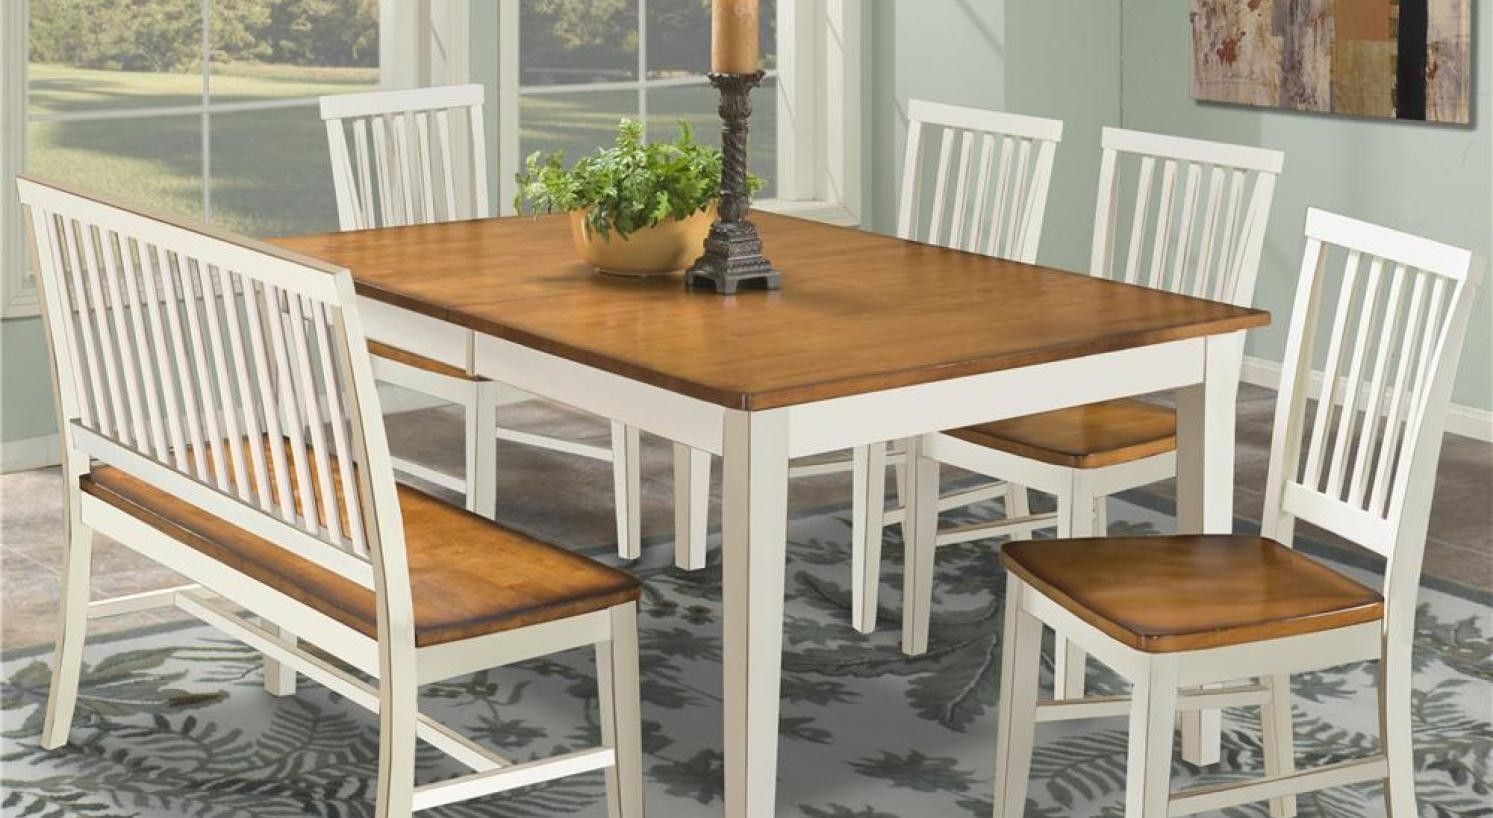 Dining Table With Bench Visualhunt, Wooden Kitchen Benches With Backs